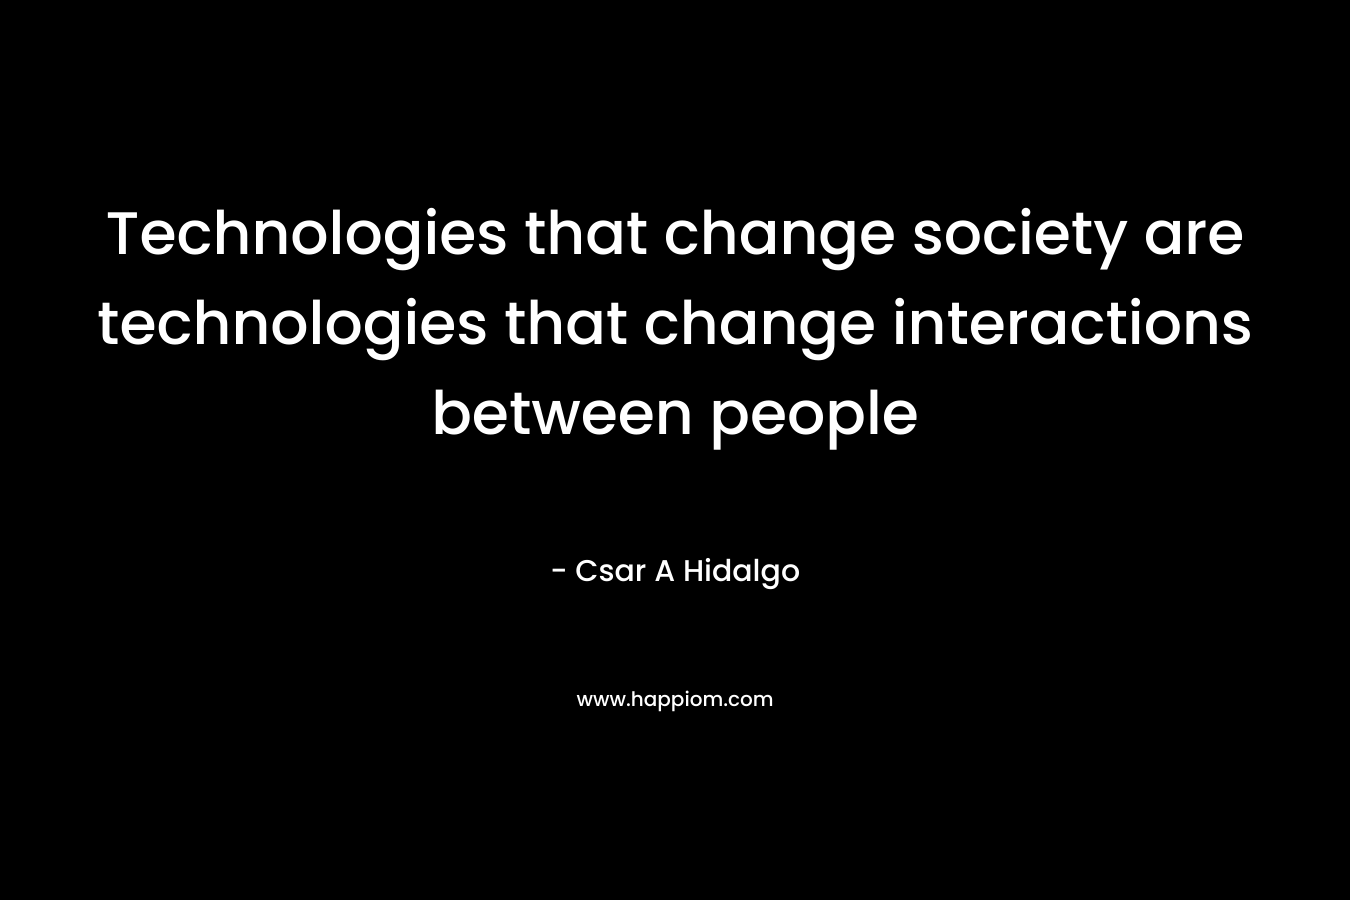 Technologies that change society are technologies that change interactions between people